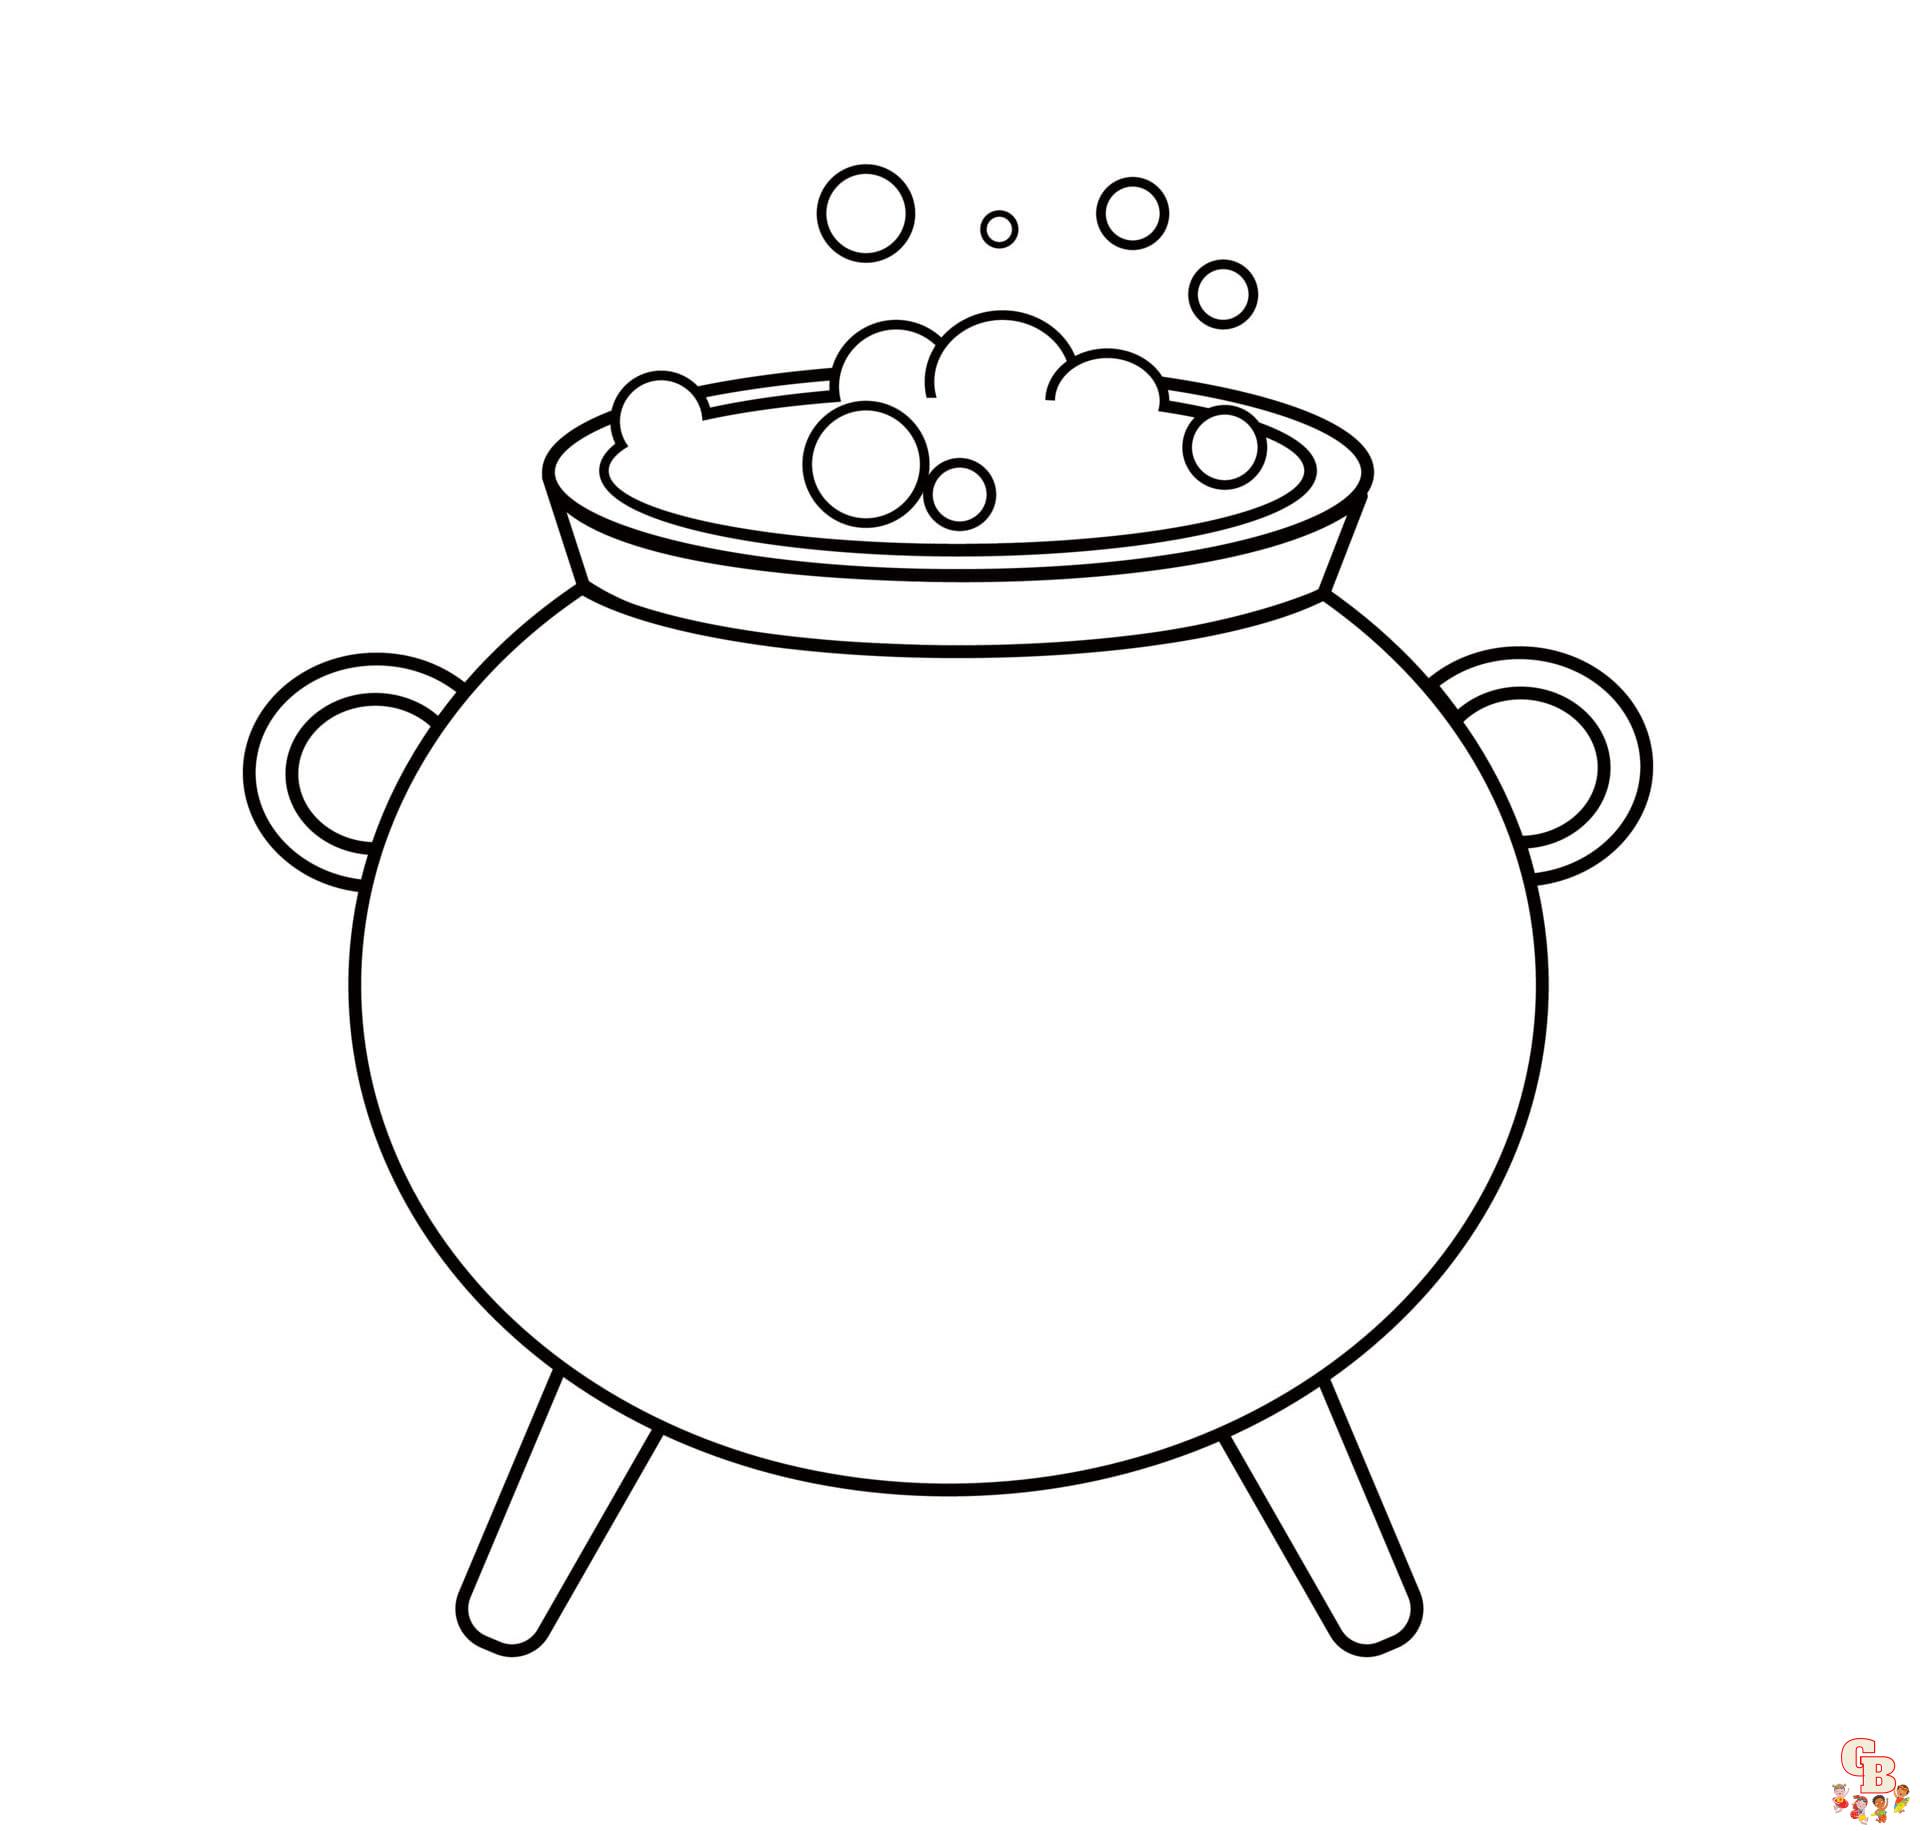 Cauldron coloring pages free